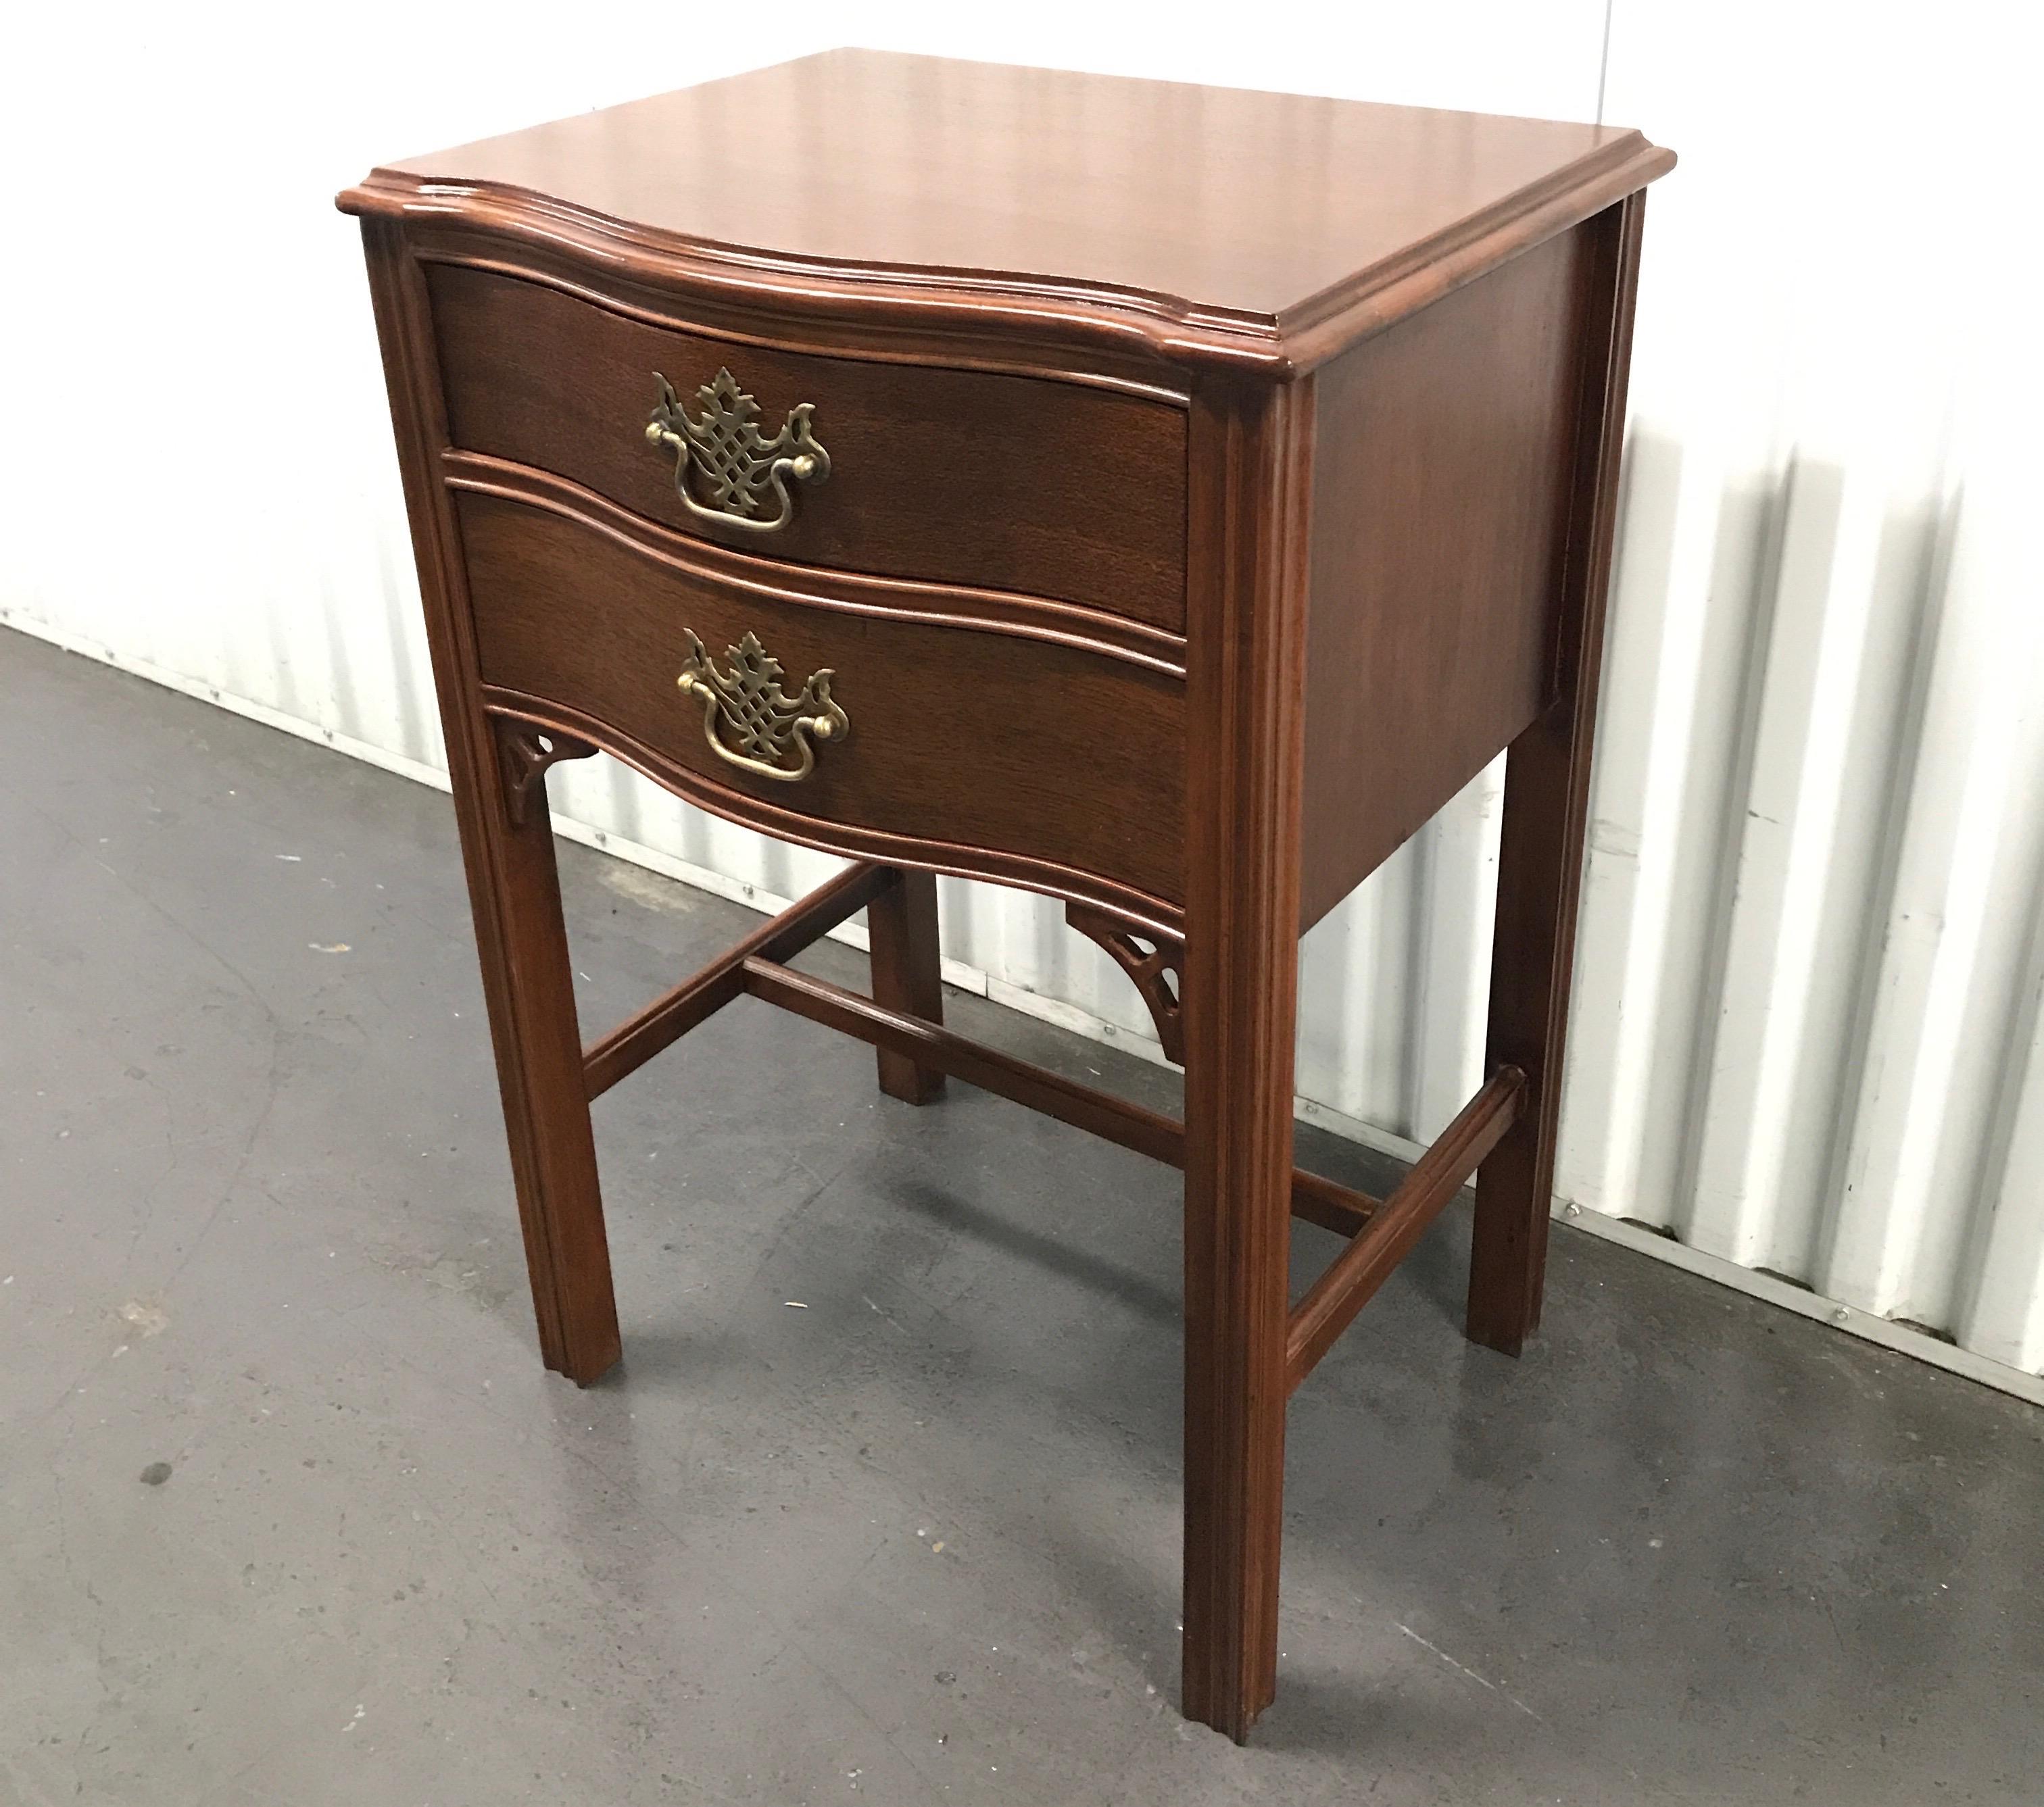 Chinese Chippendale style two-drawer side table or nightstand.